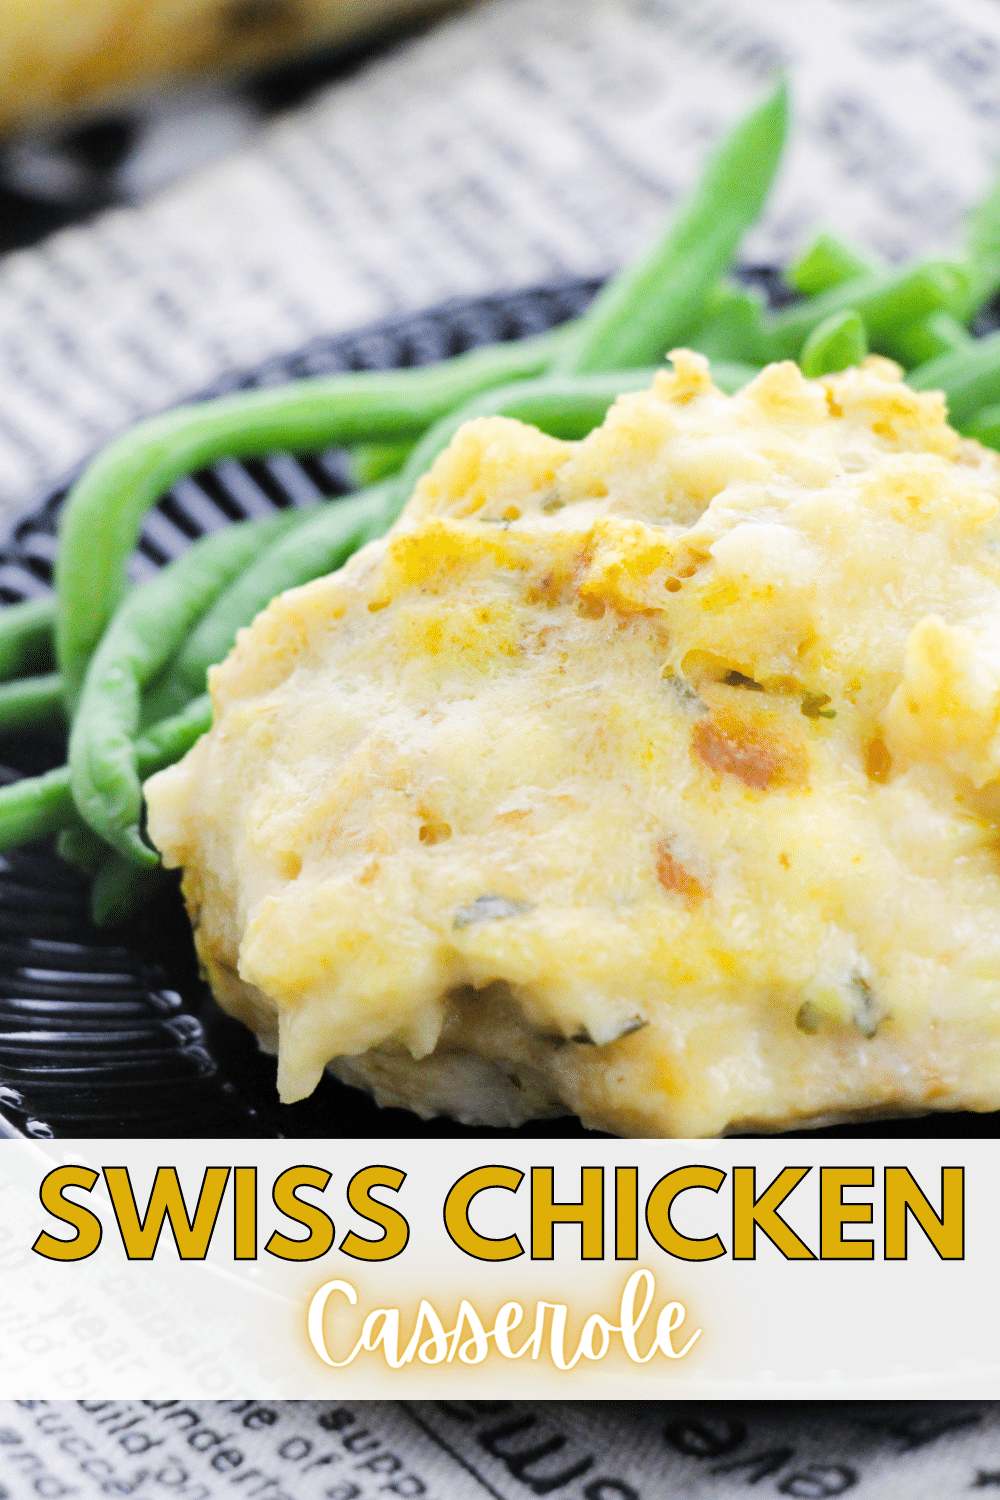 Swiss chicken casserole is an easy, yet incredibly satisfying dish featuring melted Swiss cheese, juicy chicken, and savory stuffing. #swisschickencasserole #swisscheese #casserolerecipe #creamyswisschickenbake #stuffingcasserole via @wondermomwannab